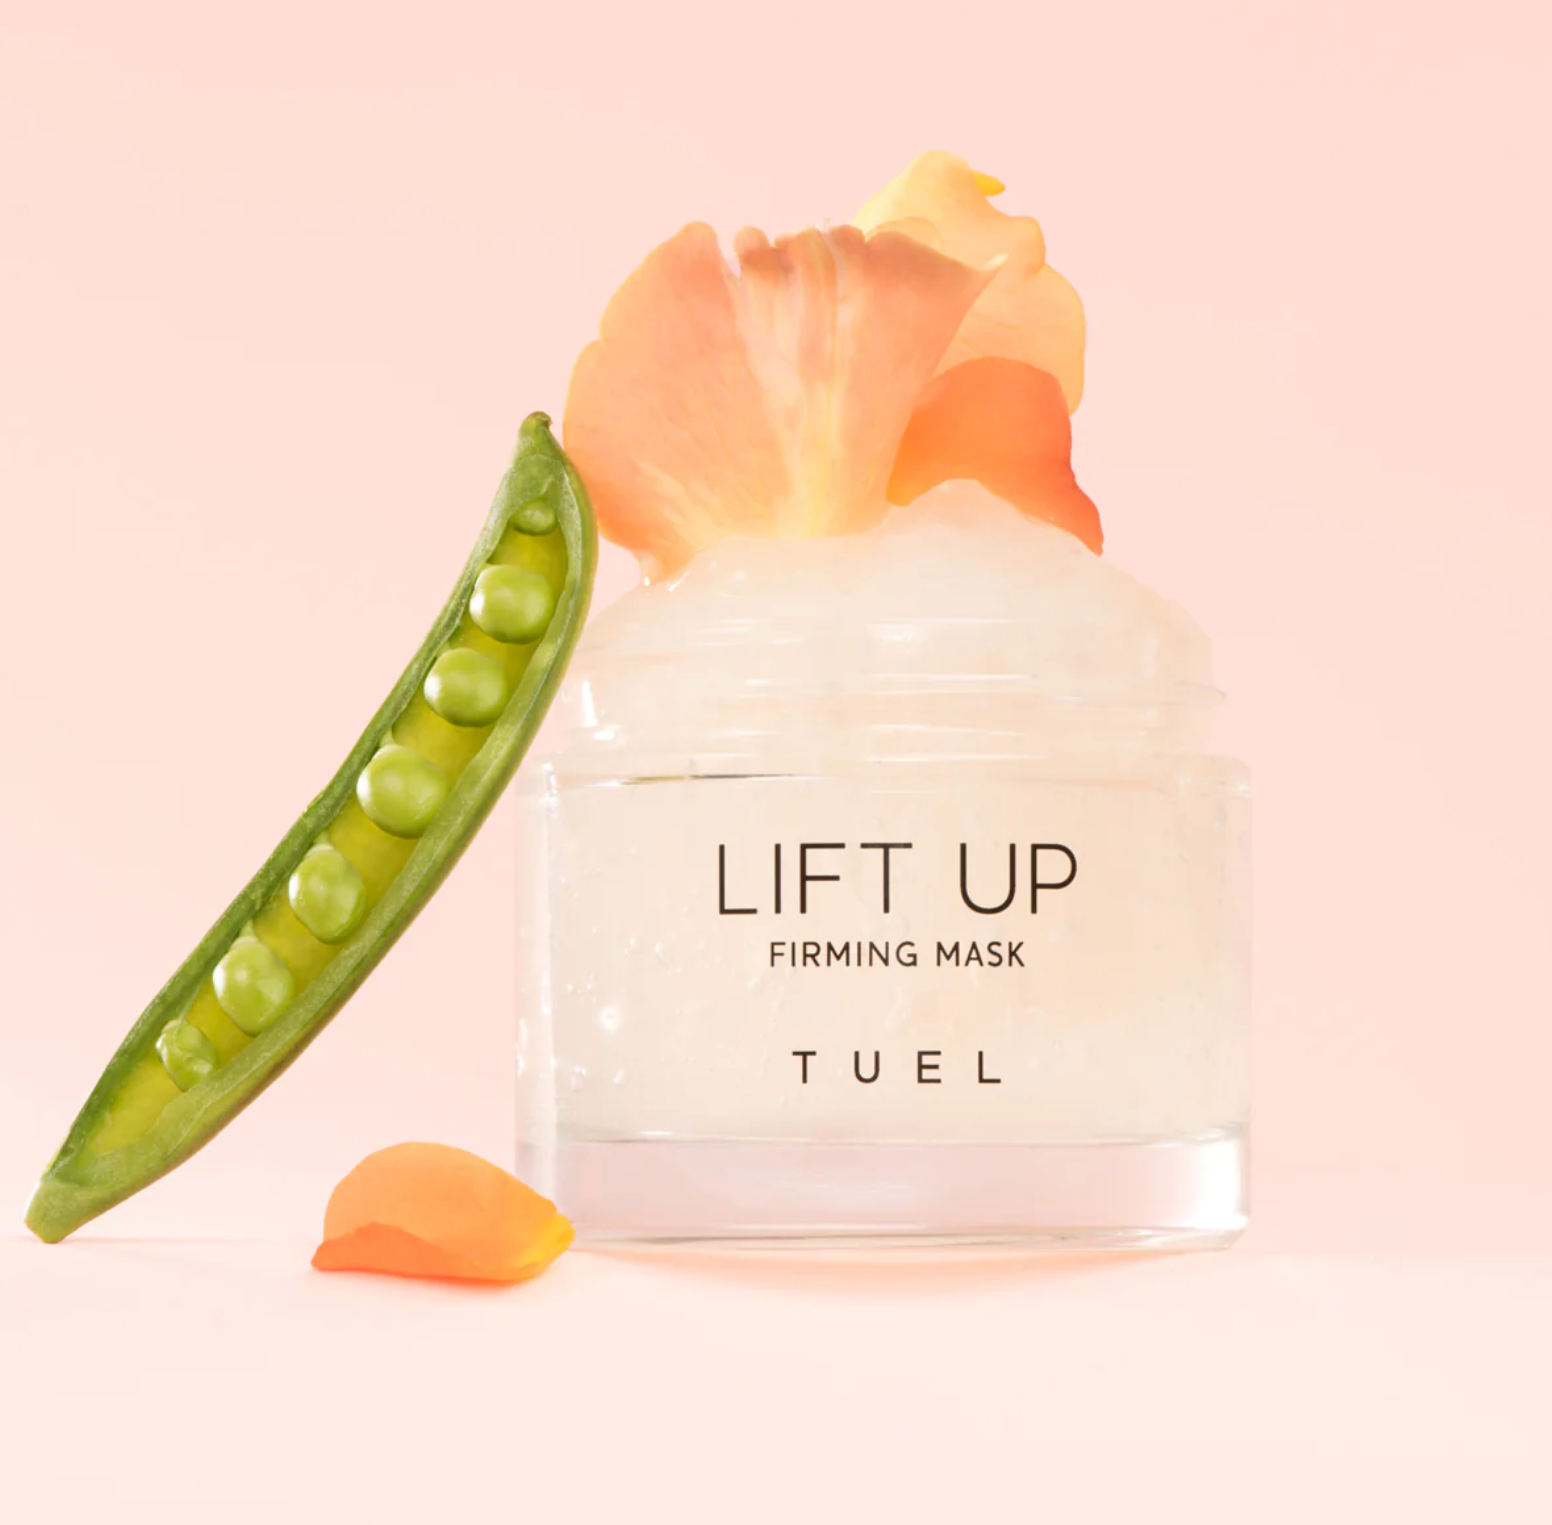 LIFT UP FIRMING MASK